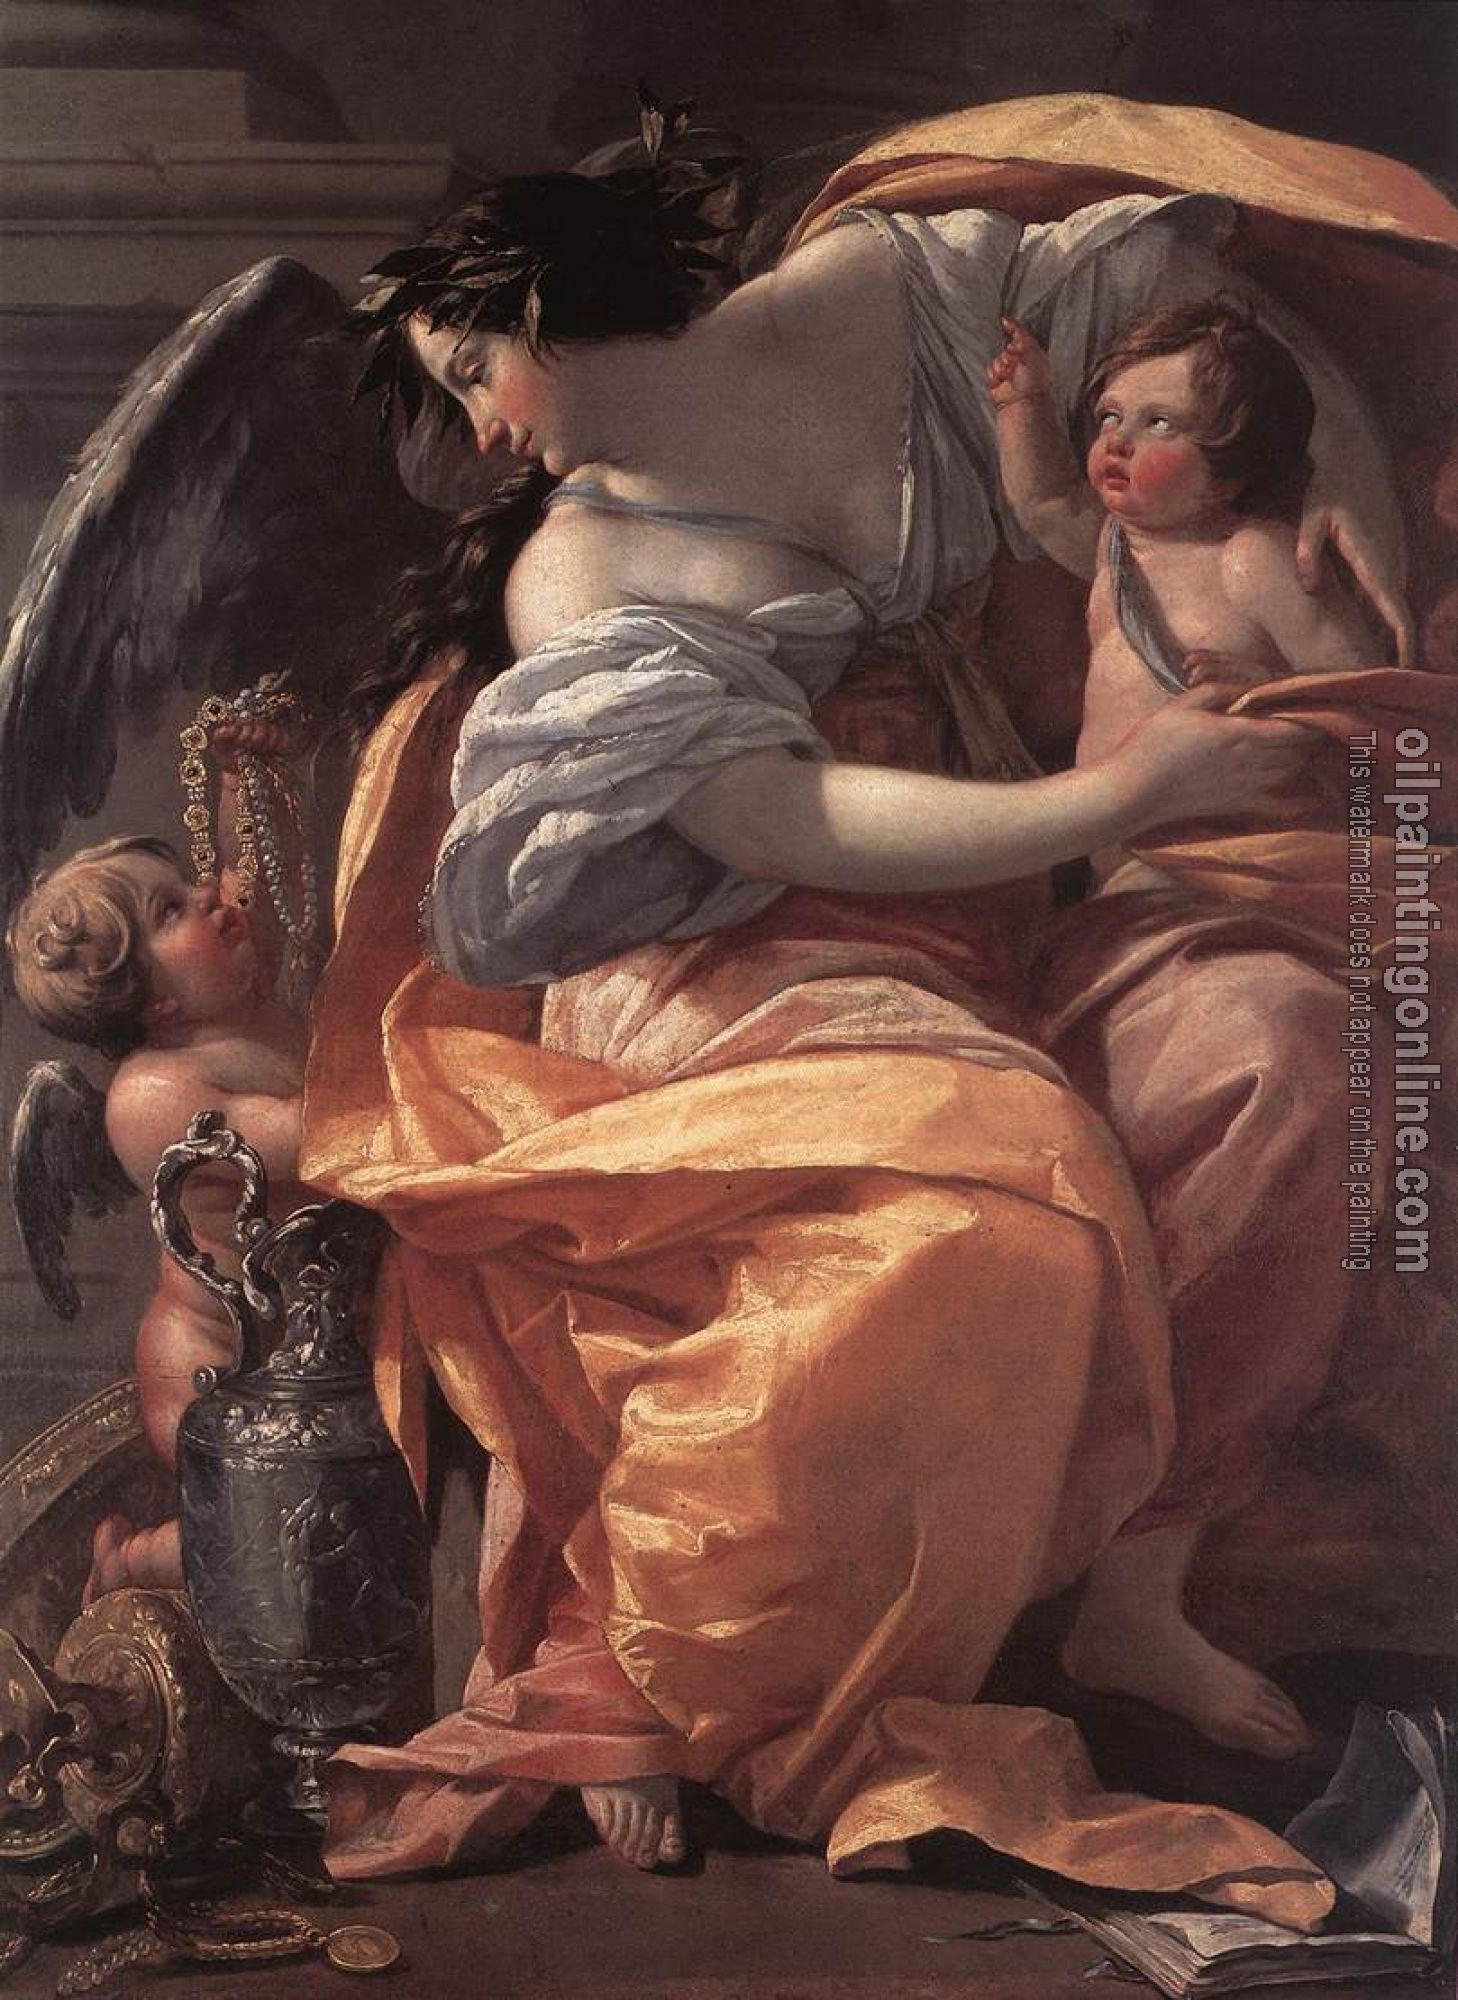 Vouet, Simon - Allegory of Wealth